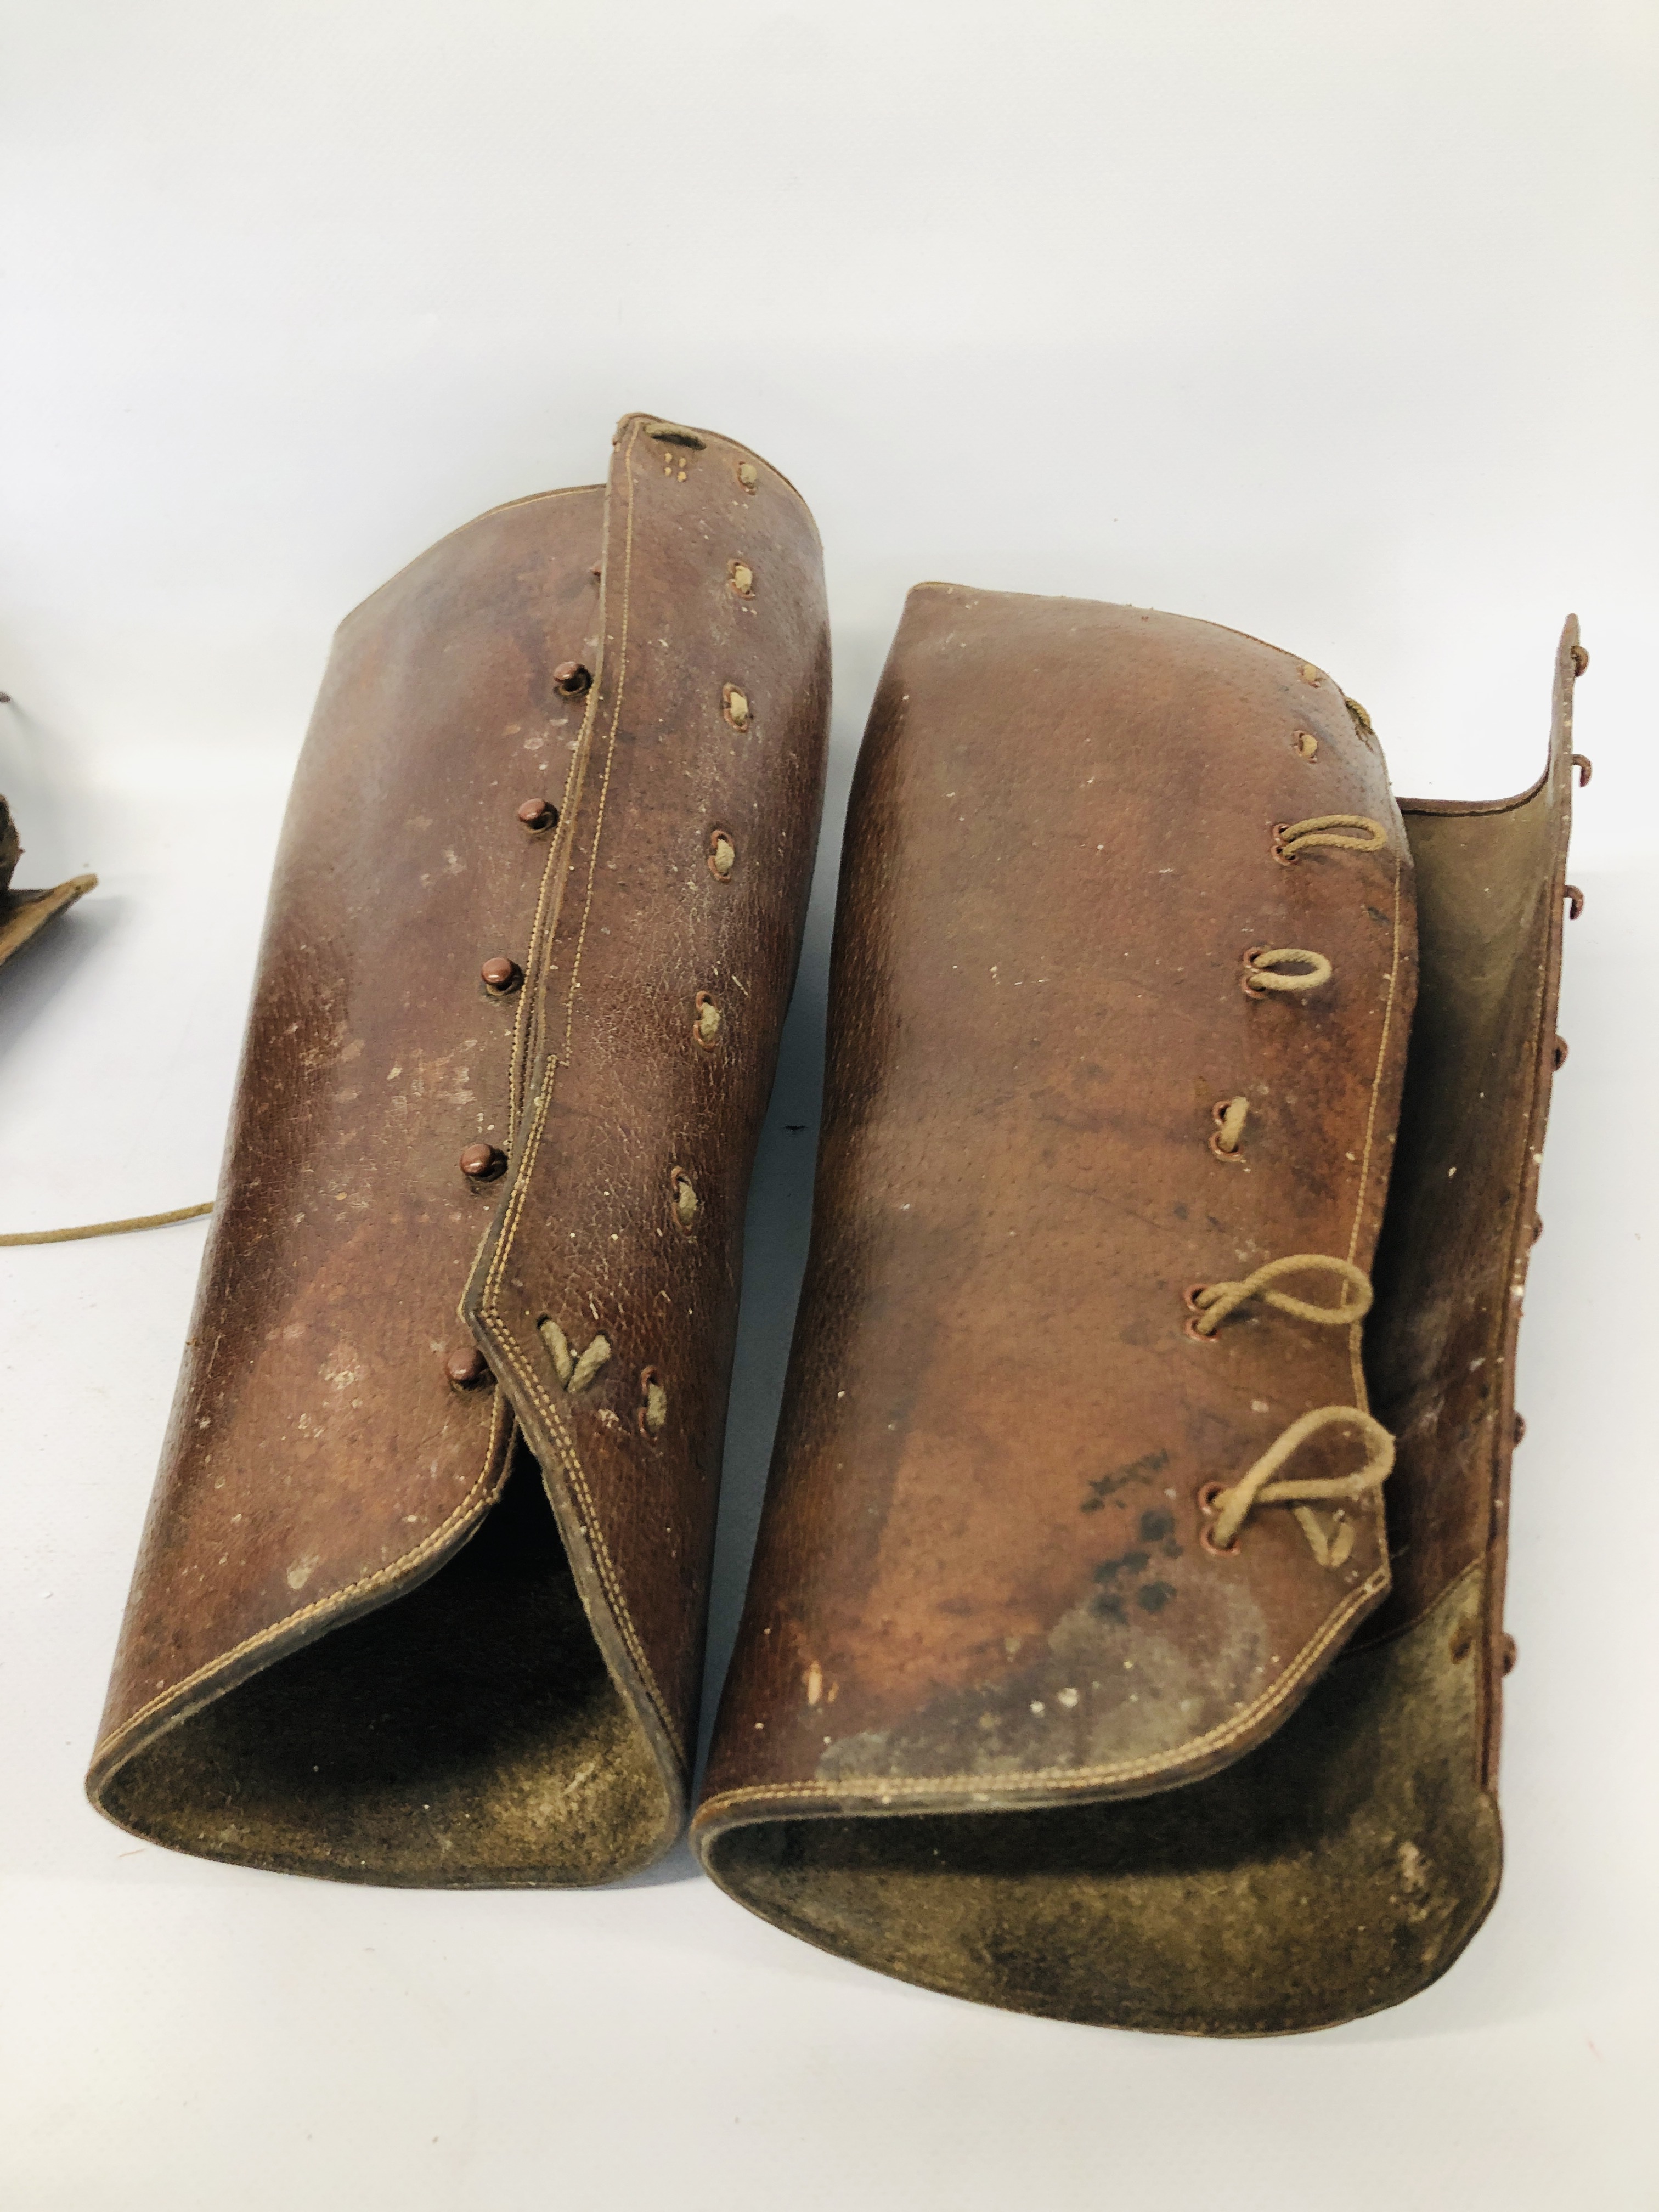 SIX PAIRS OF LEATHER BUSKINS - Image 2 of 8